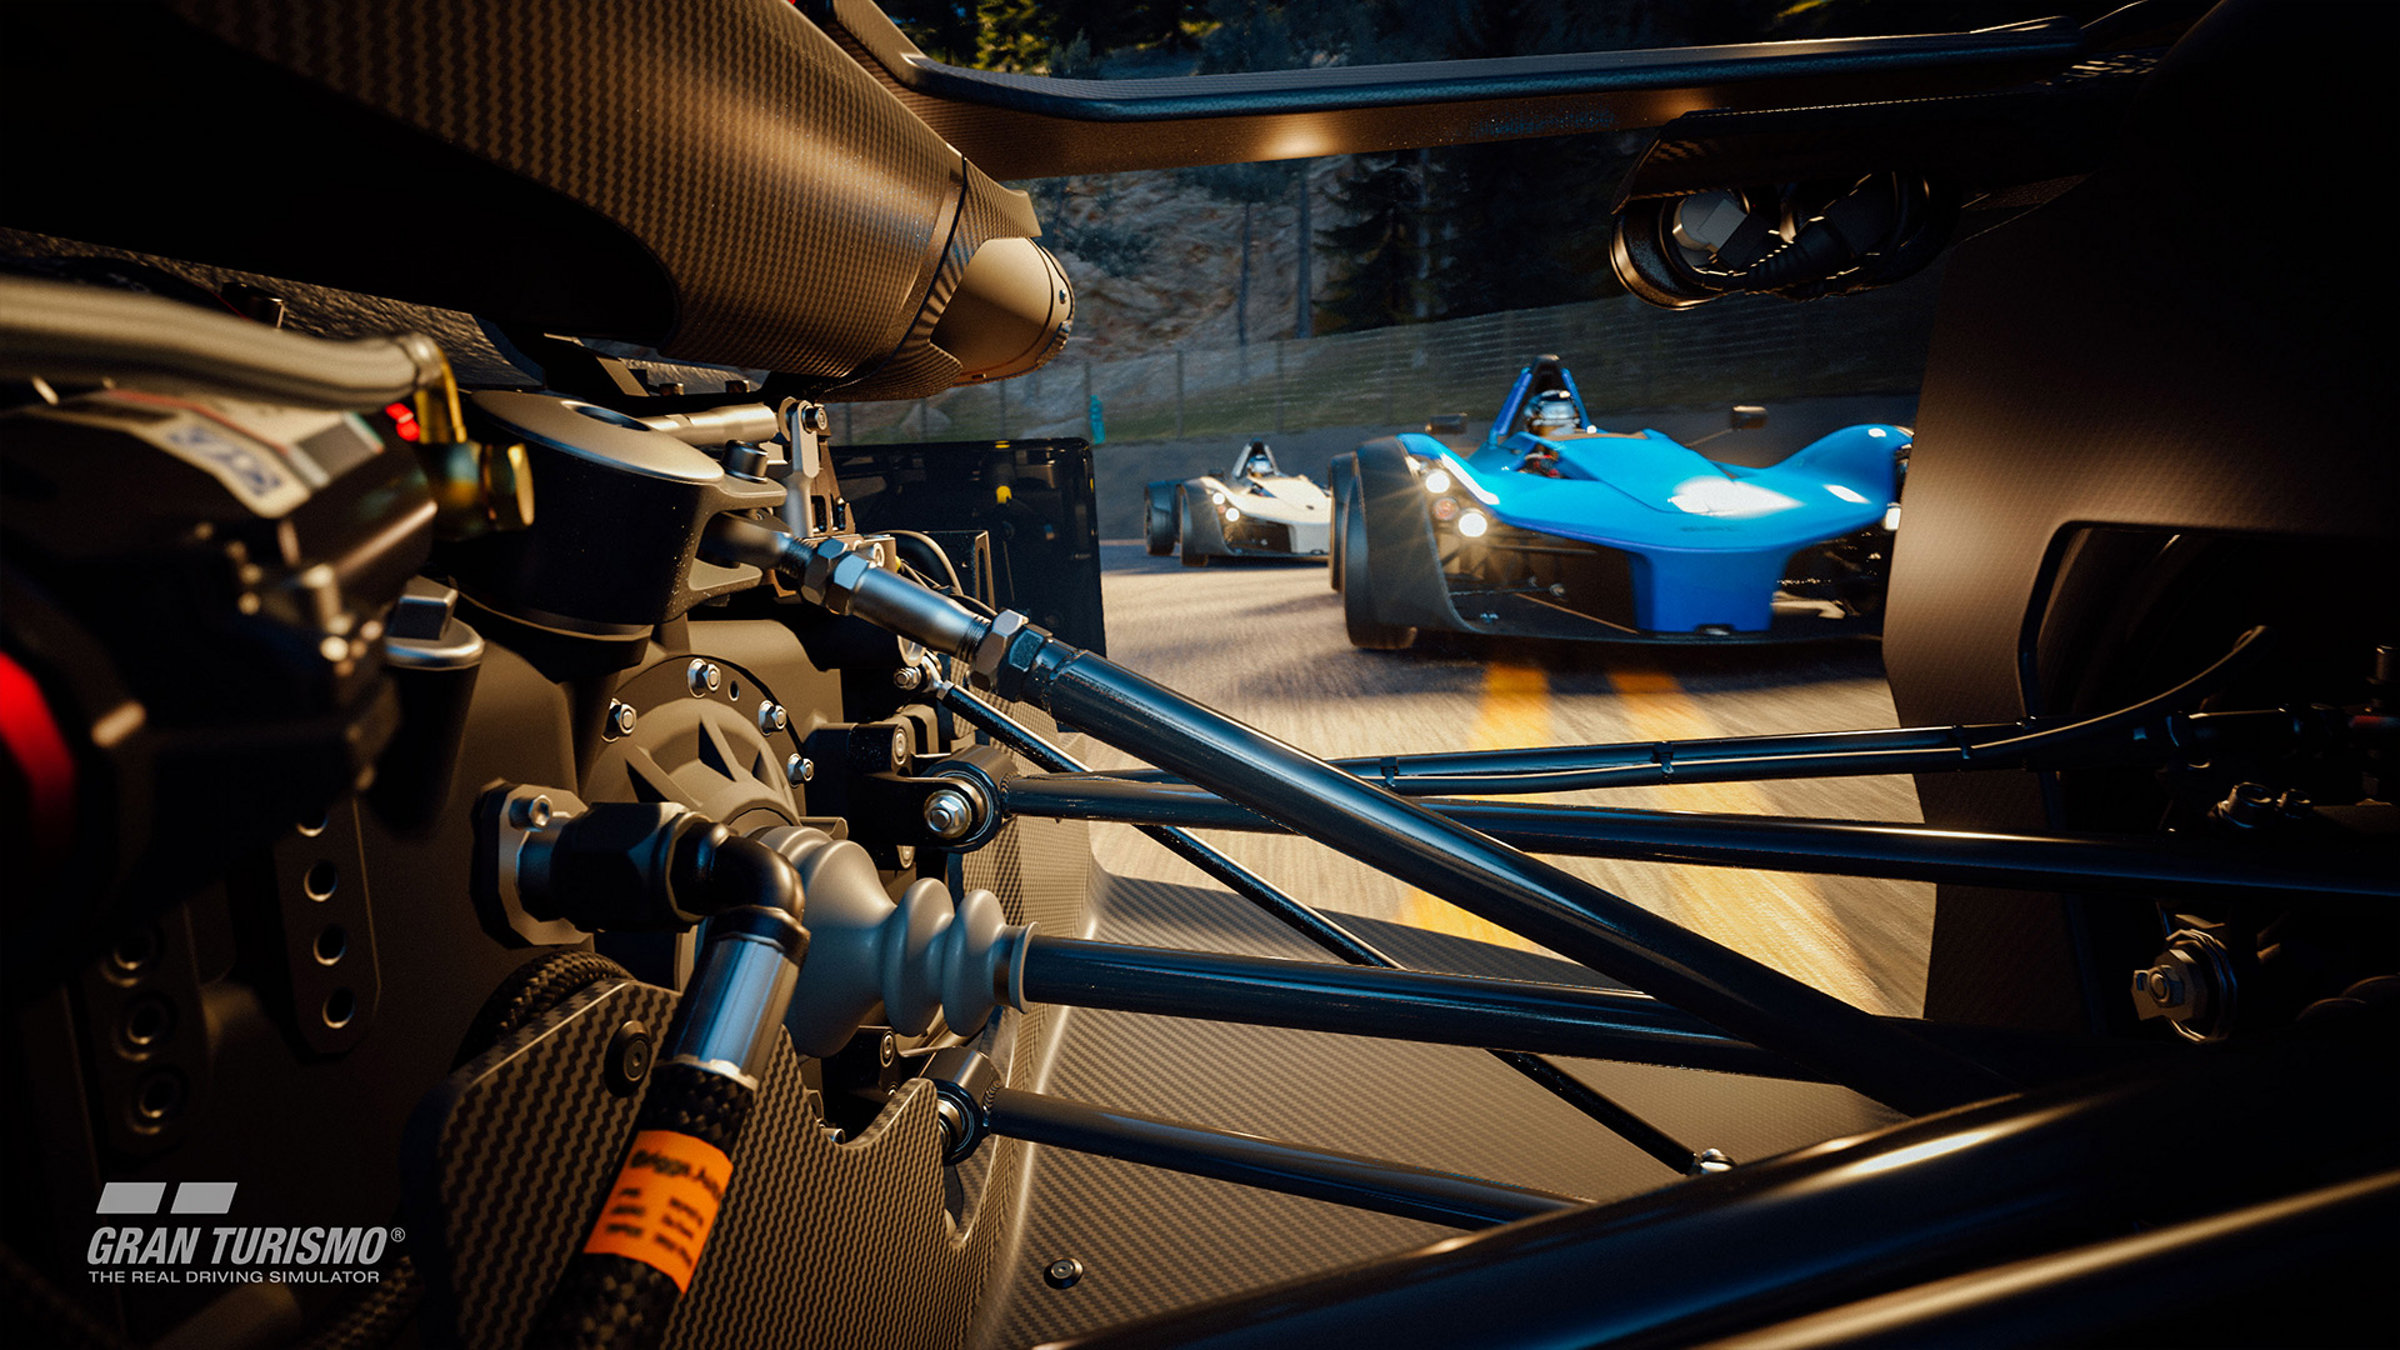 Gran Turismo 7 – PS5 vs. PS4 performance comparison, and what